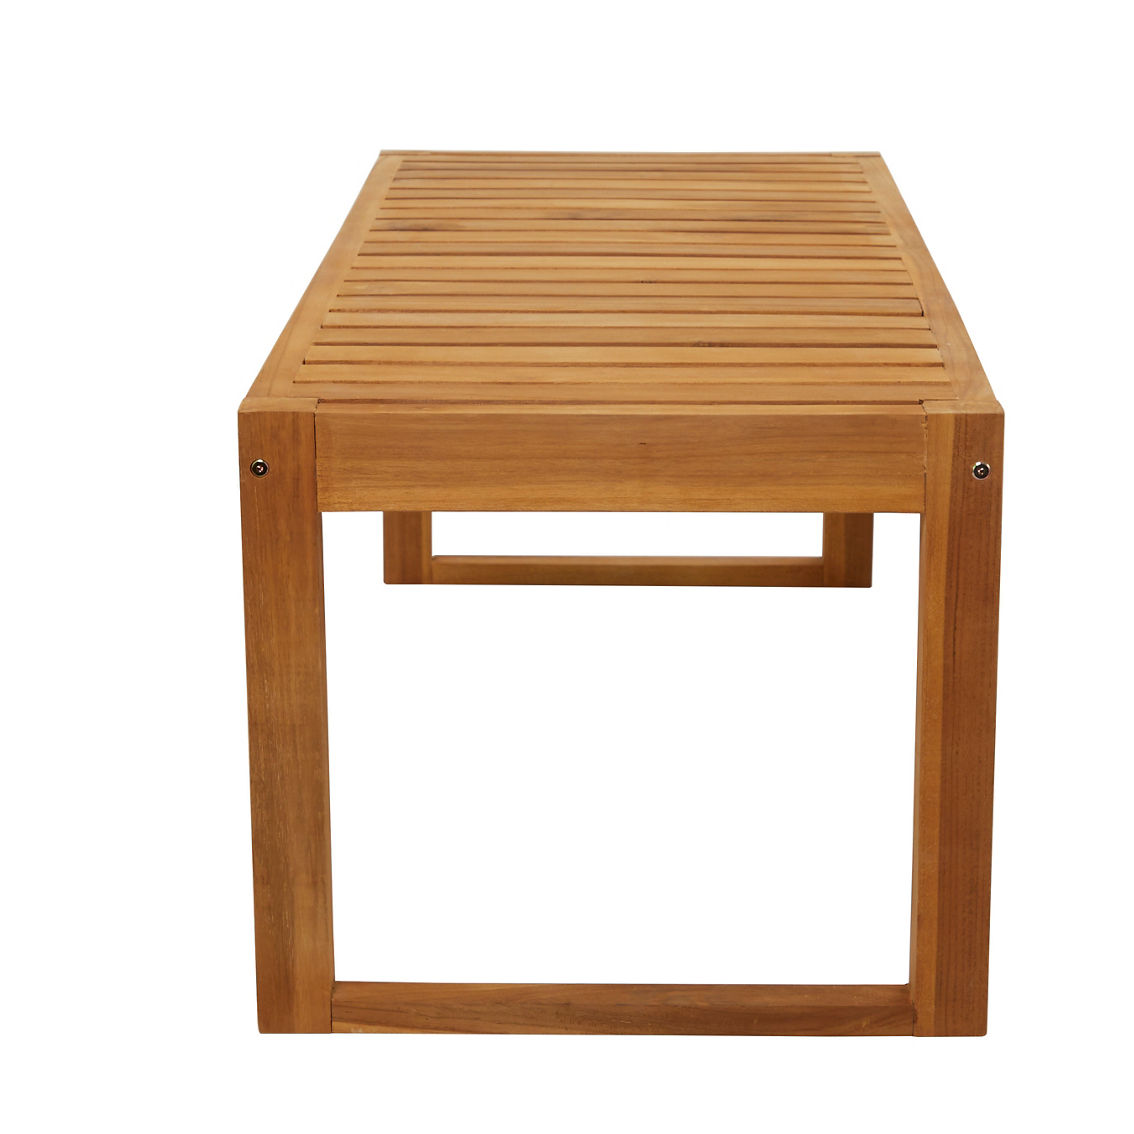 Morgan Hill Home Contemporary Brown Teak Wood Outdoor Coffee Table - Image 5 of 5